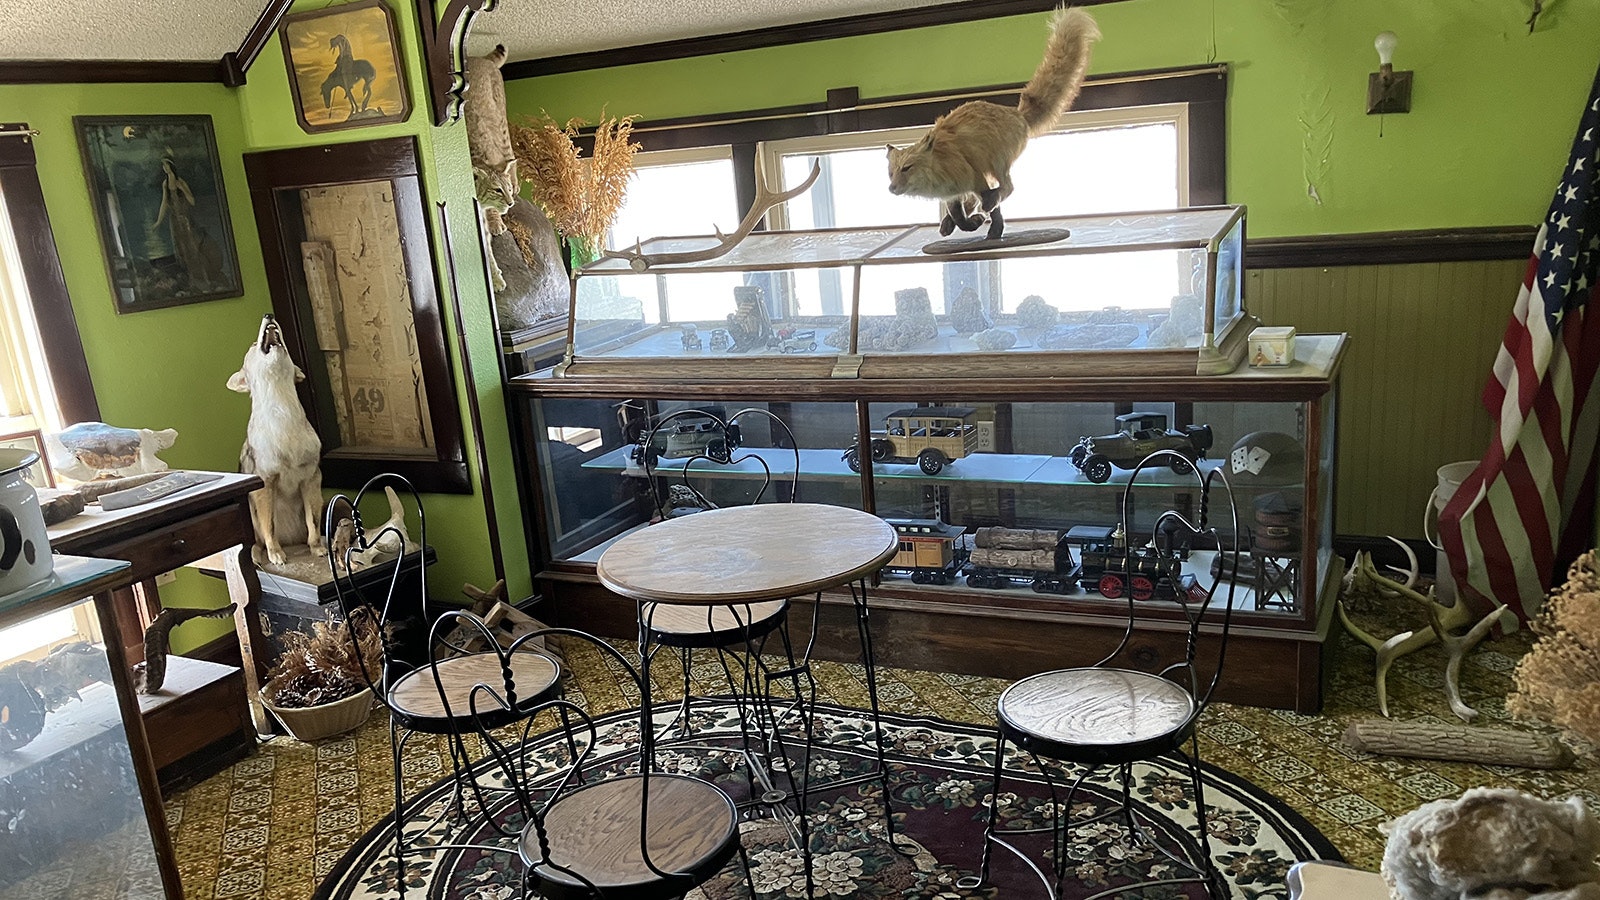 A room in the museum above the Plains Ice Cream Parlor features some taxidermied animals, as well as a display of model cars and a train.